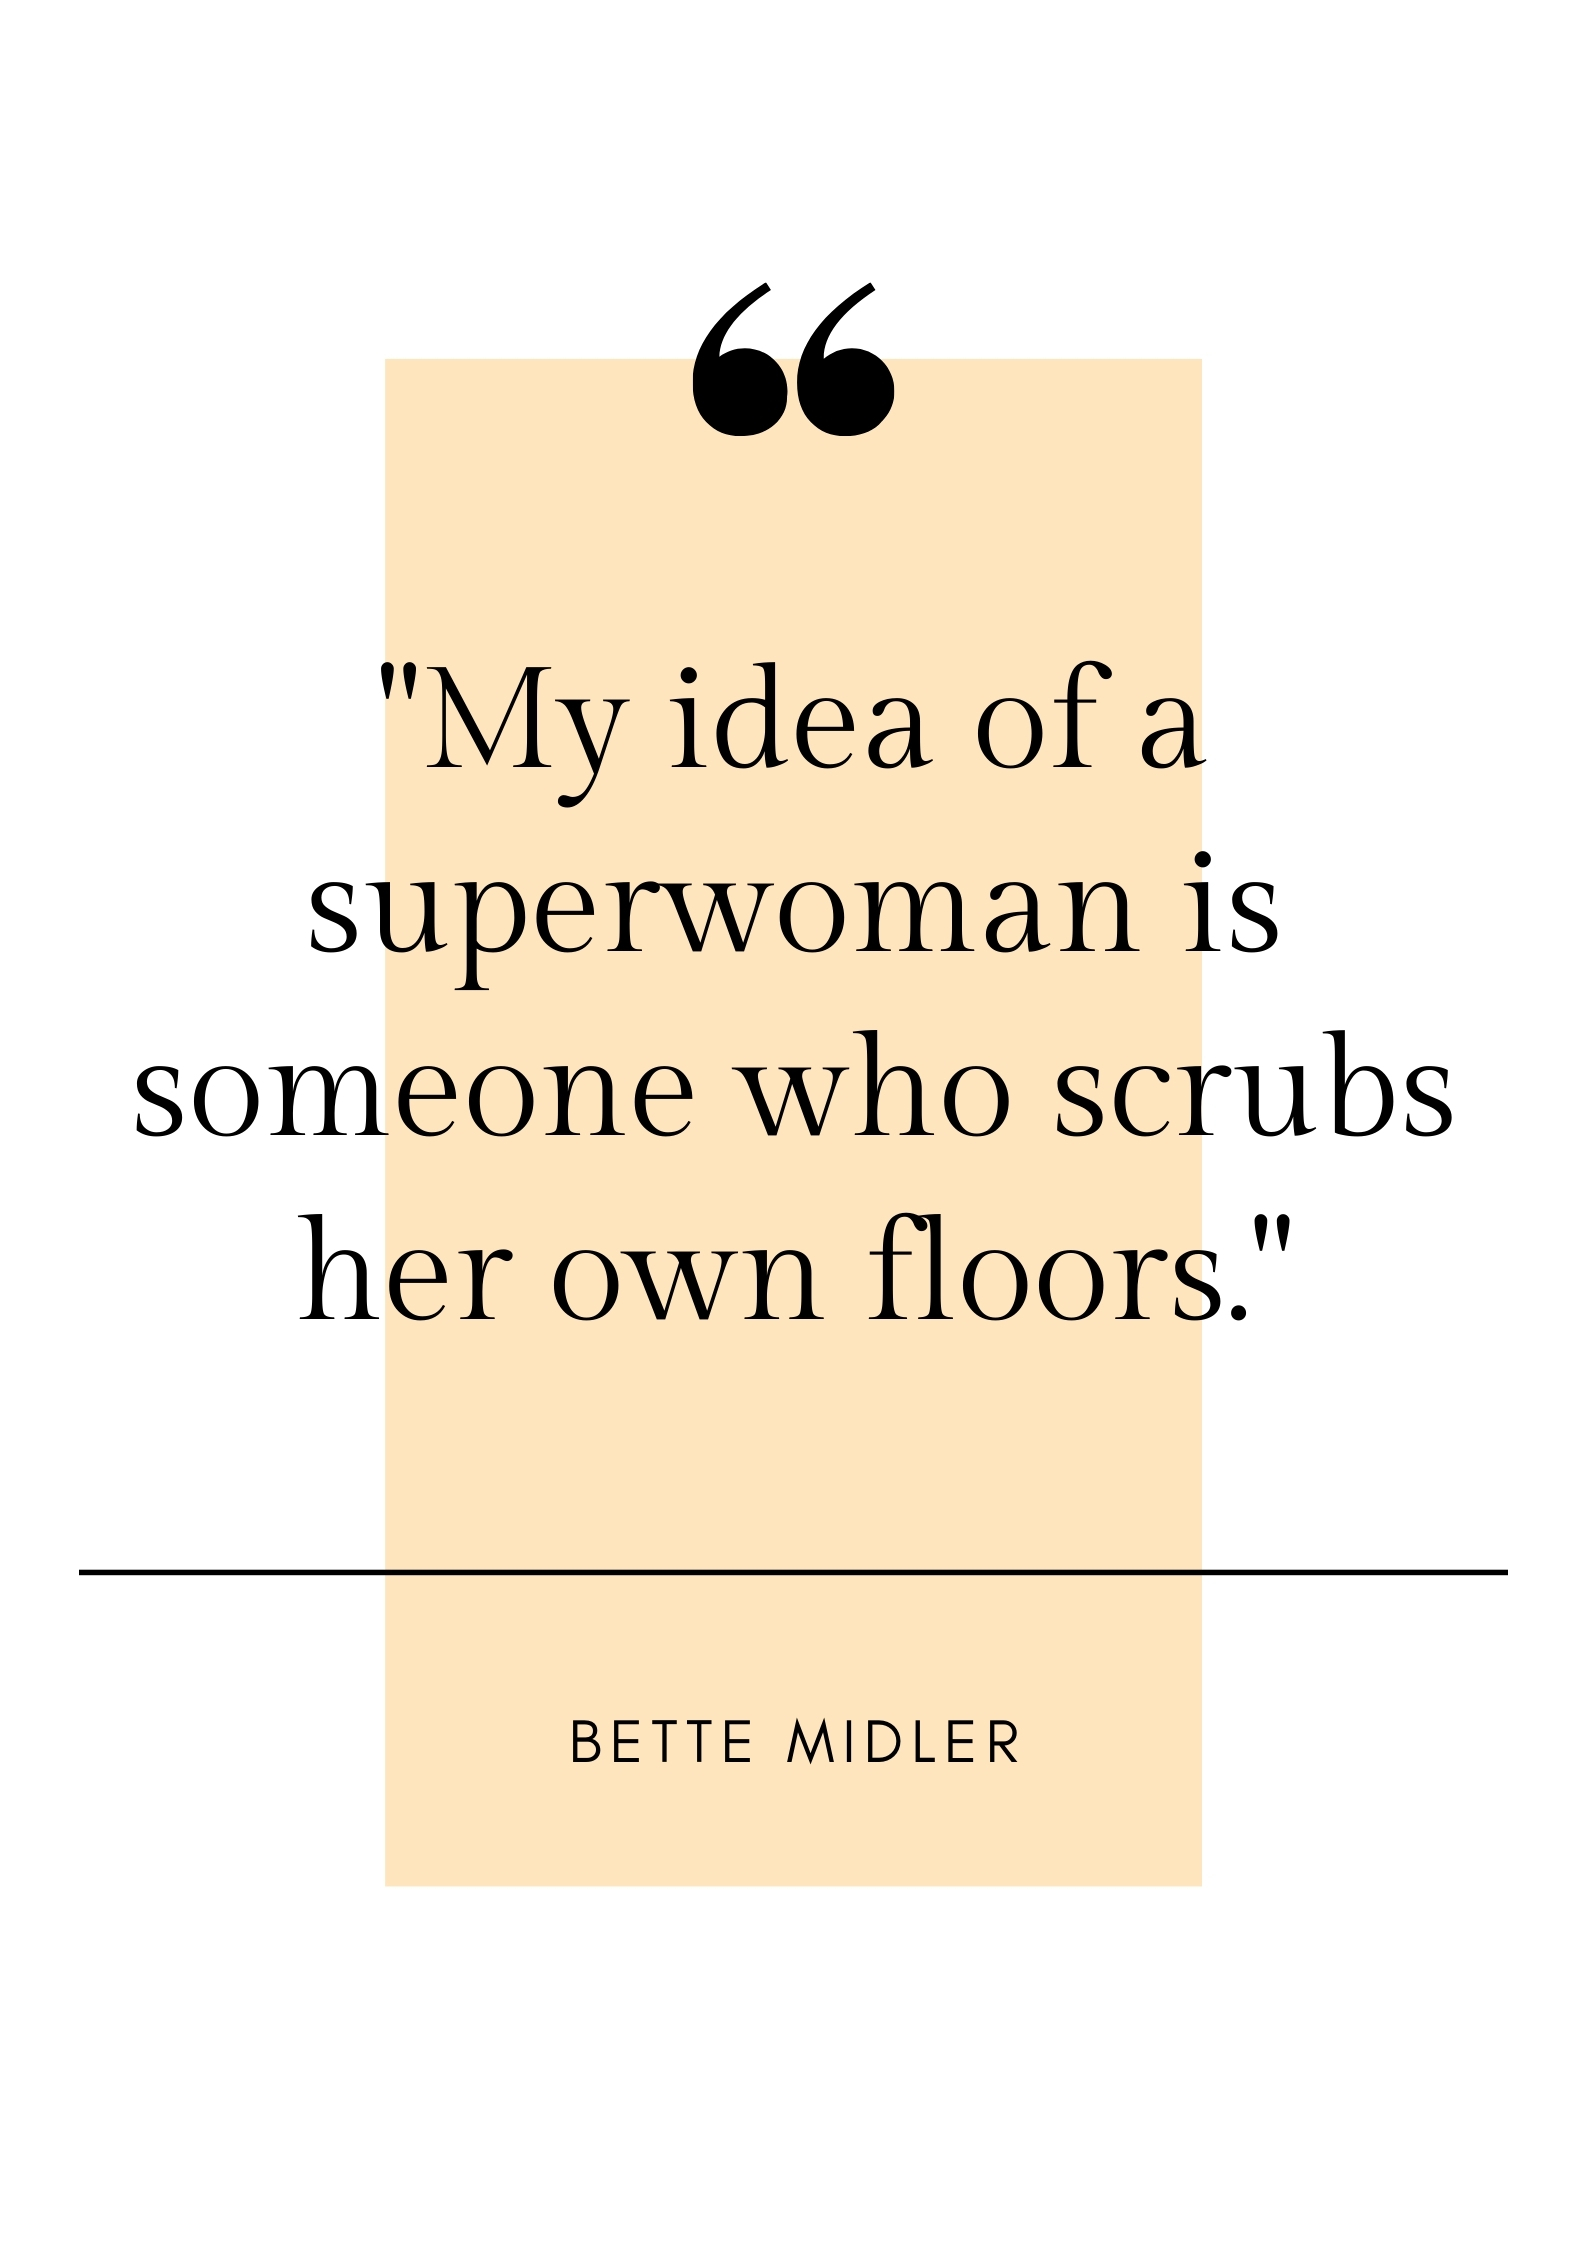 bette midler quote